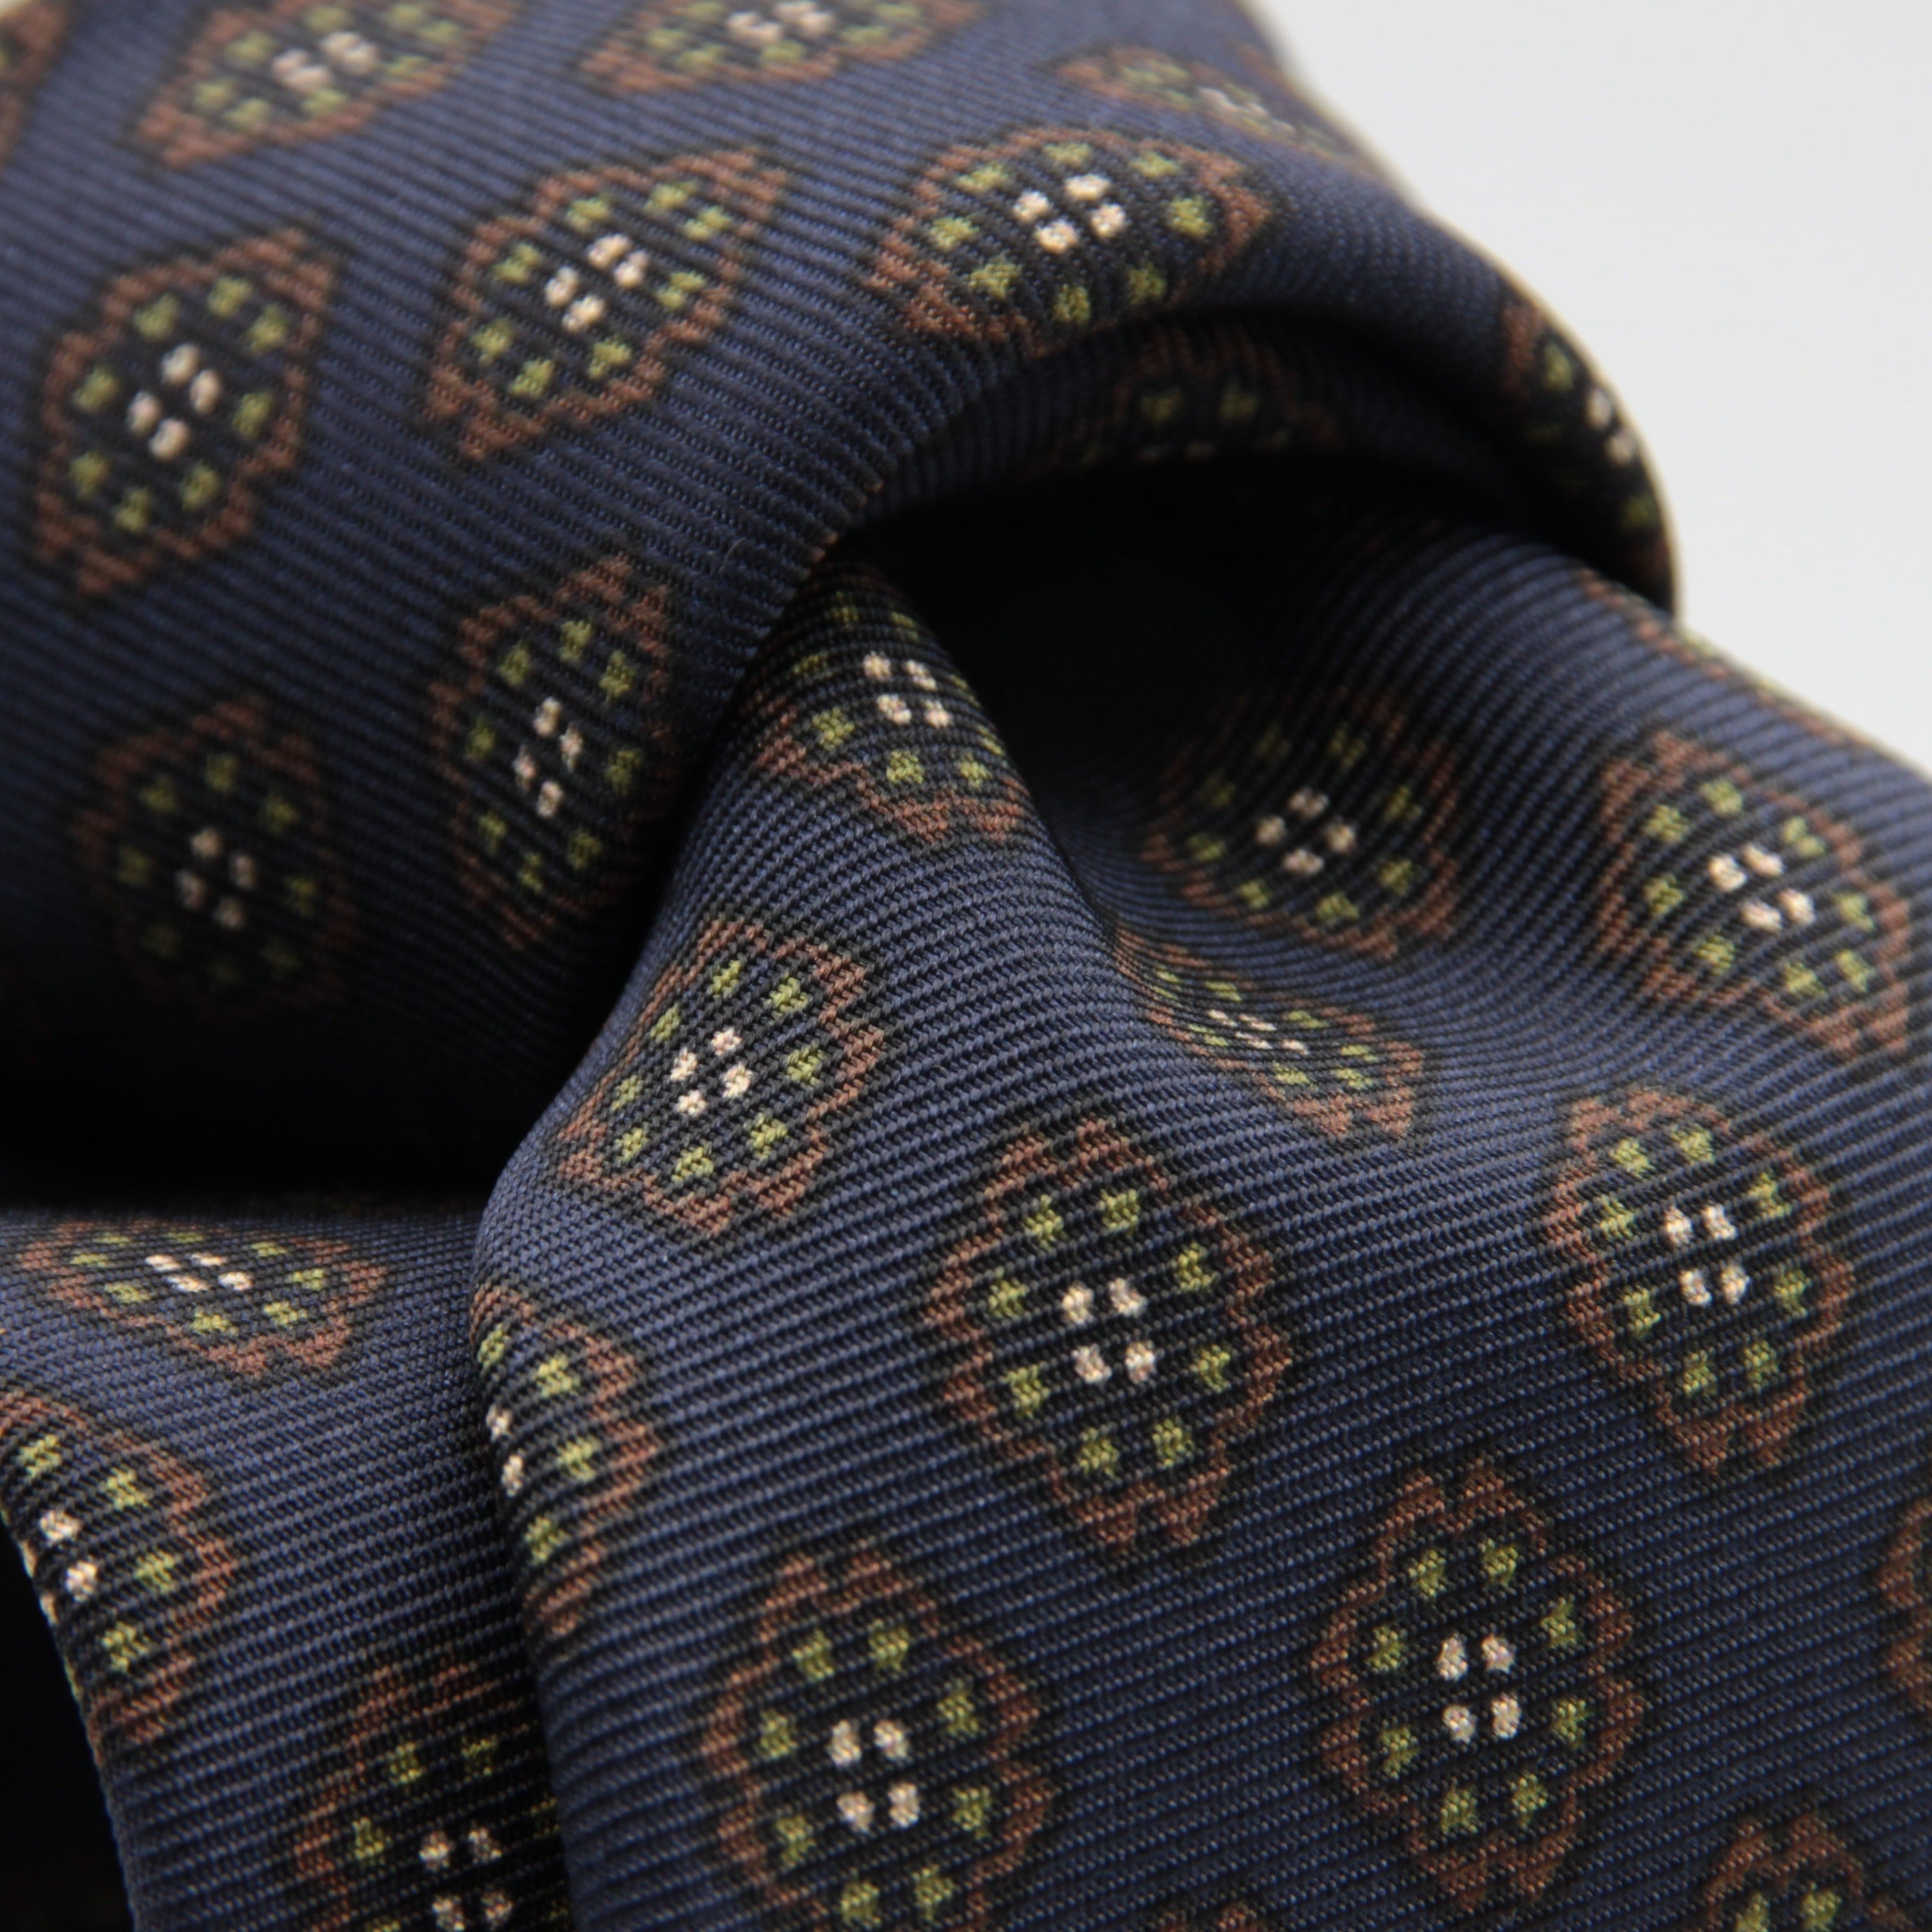 Holliday & Brown for Cruciani & Bella 100% printed Silk Self tipped Blue, Brown and Green motif tie Handmade in Italy 8 cm x 150 cm #6970